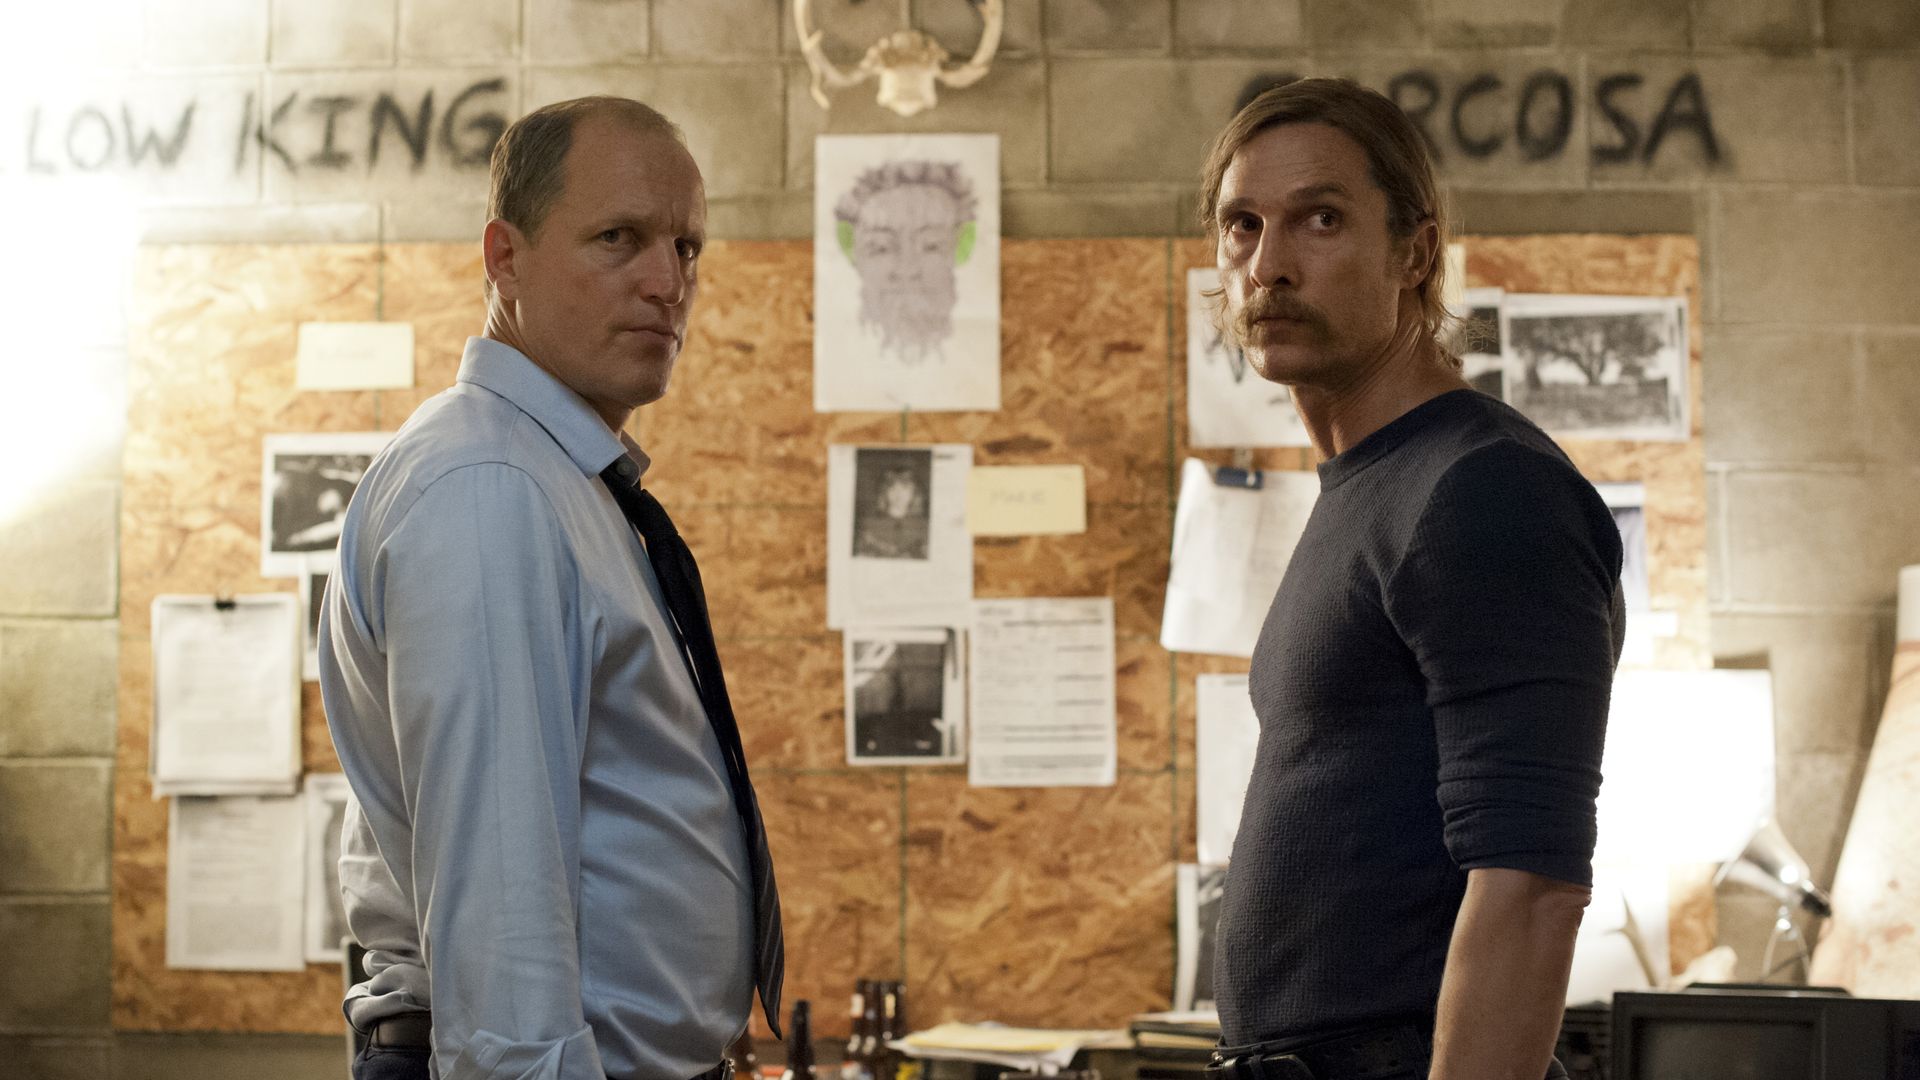 True Detective season 4 is confirmed and a double Oscar winner is on